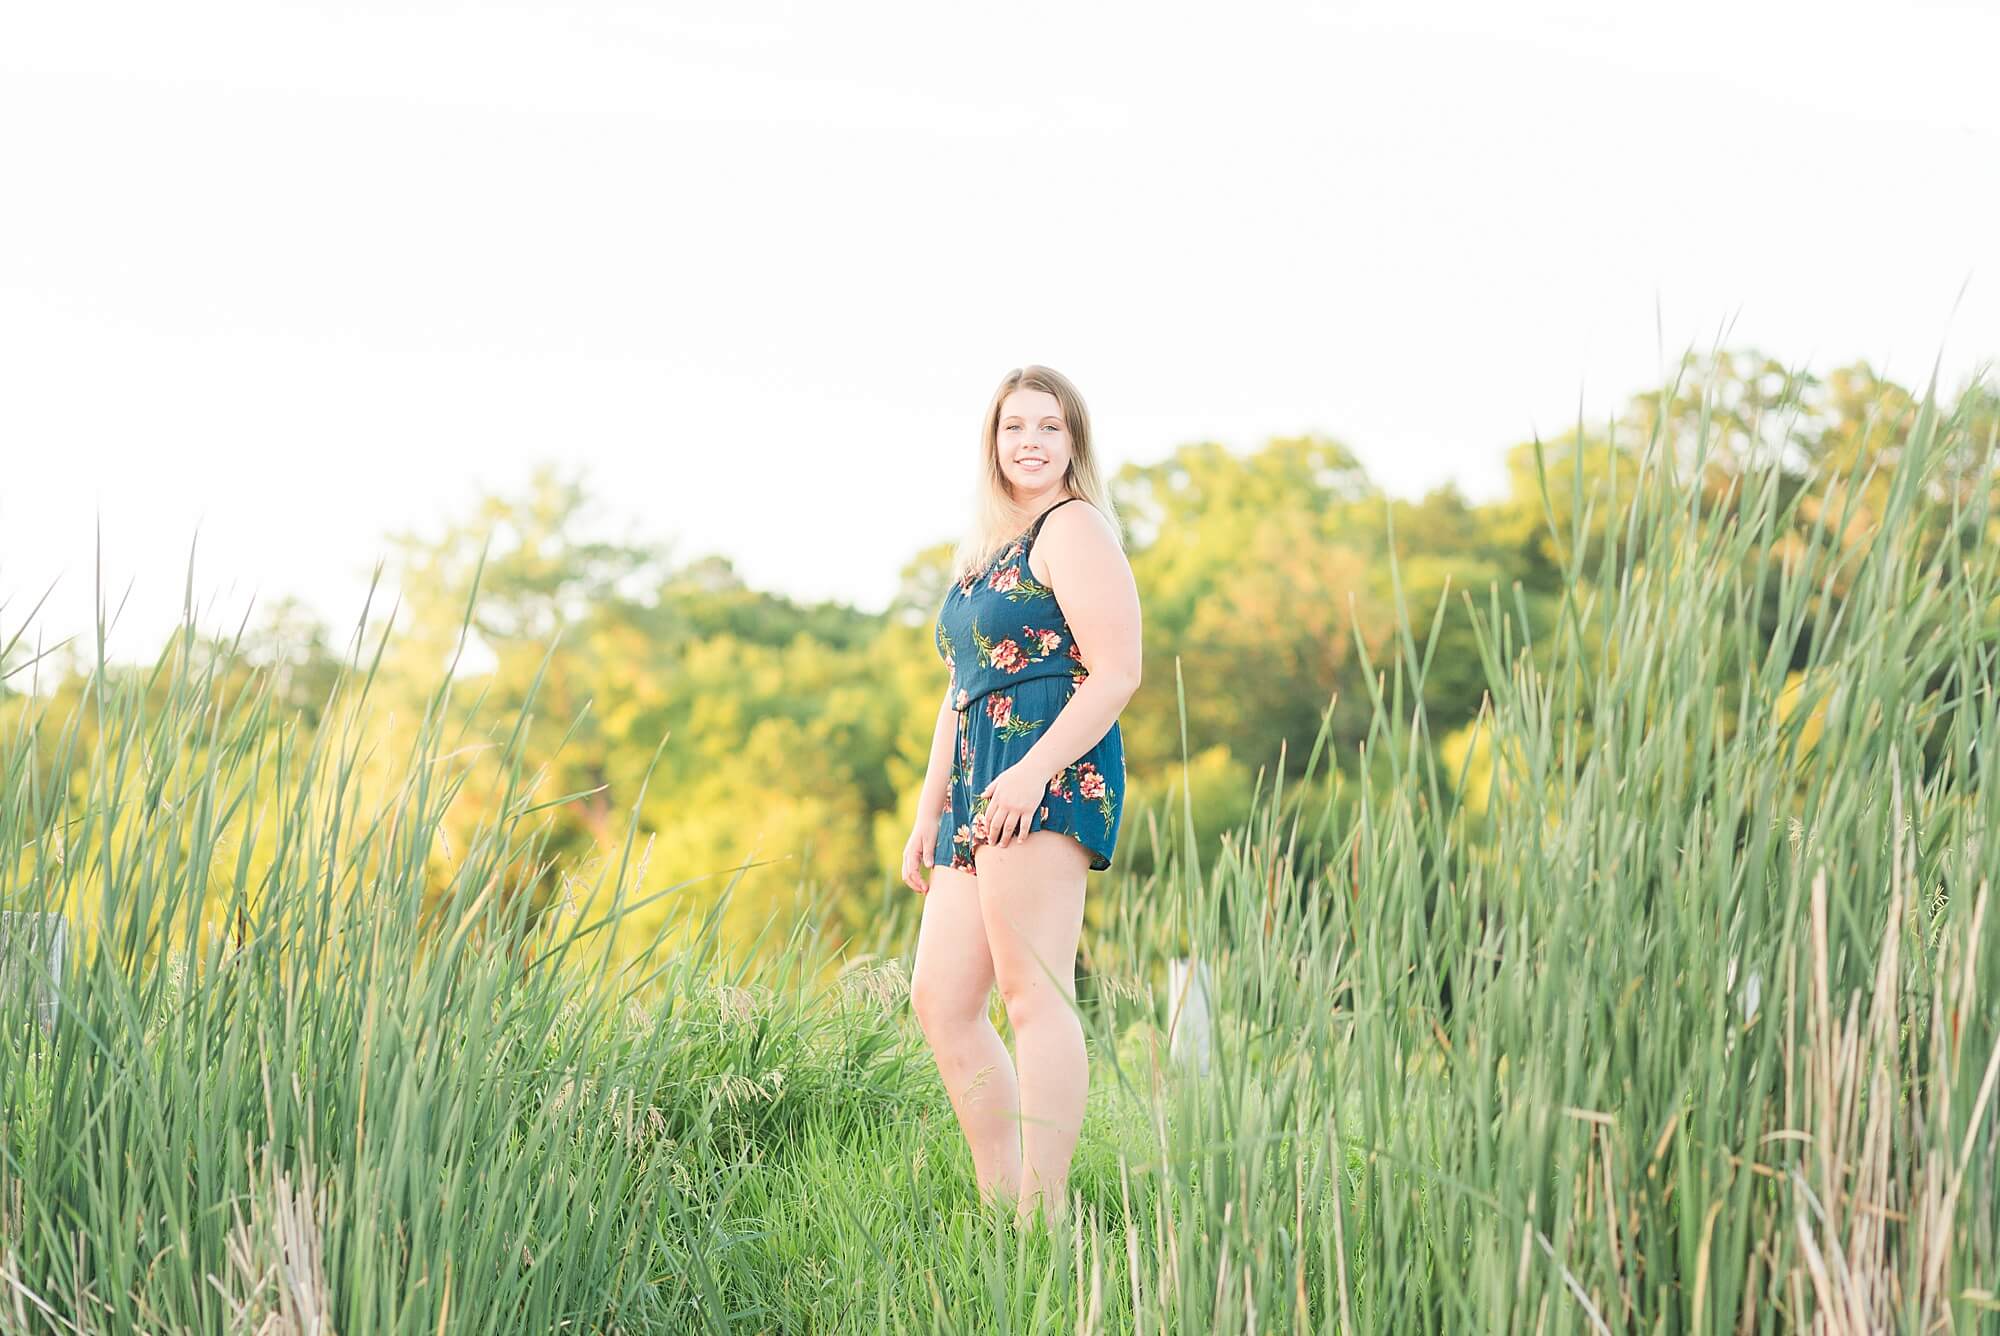 A teenager in a blue floral romper smiles along the lake and tall grass